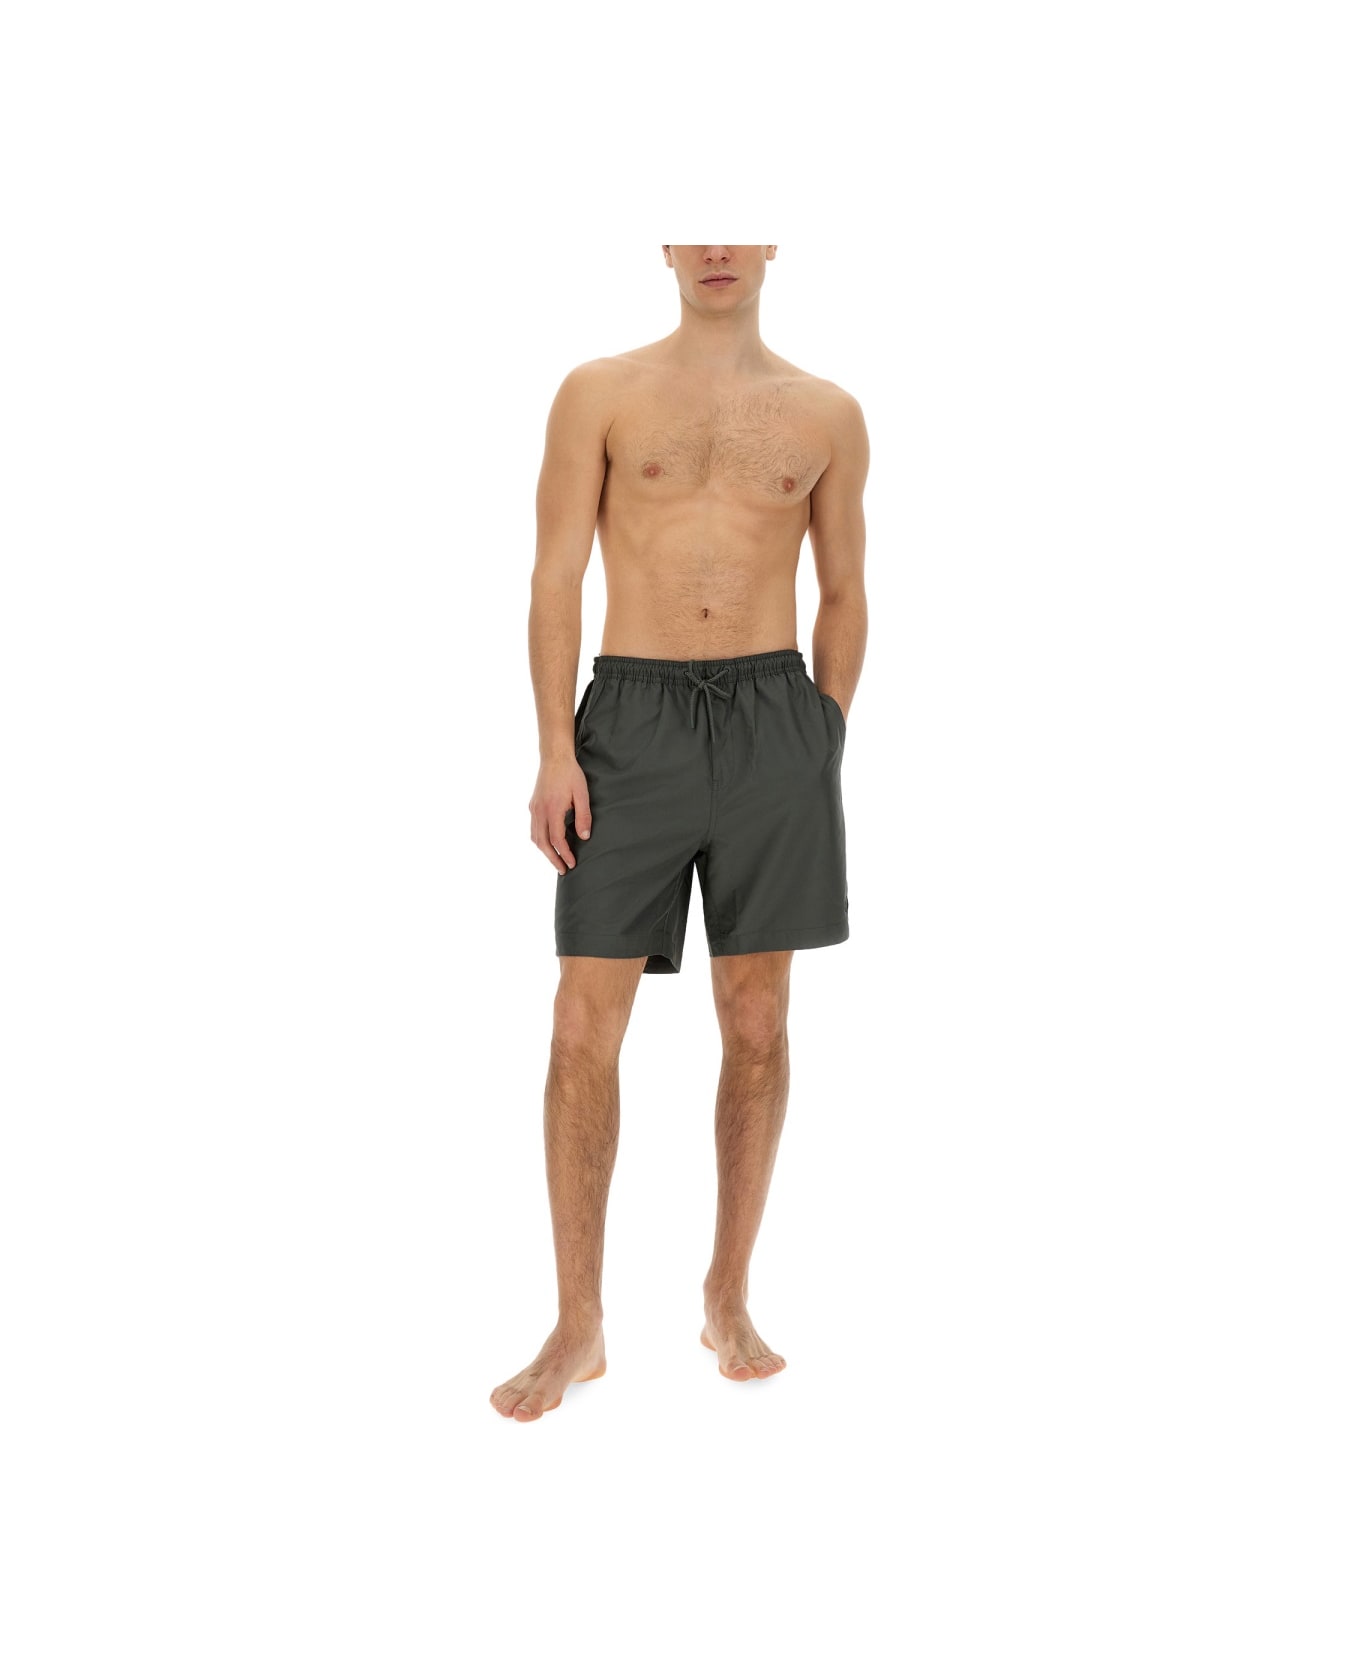 Fred Perry Swimsuit - MILITARY GREEN